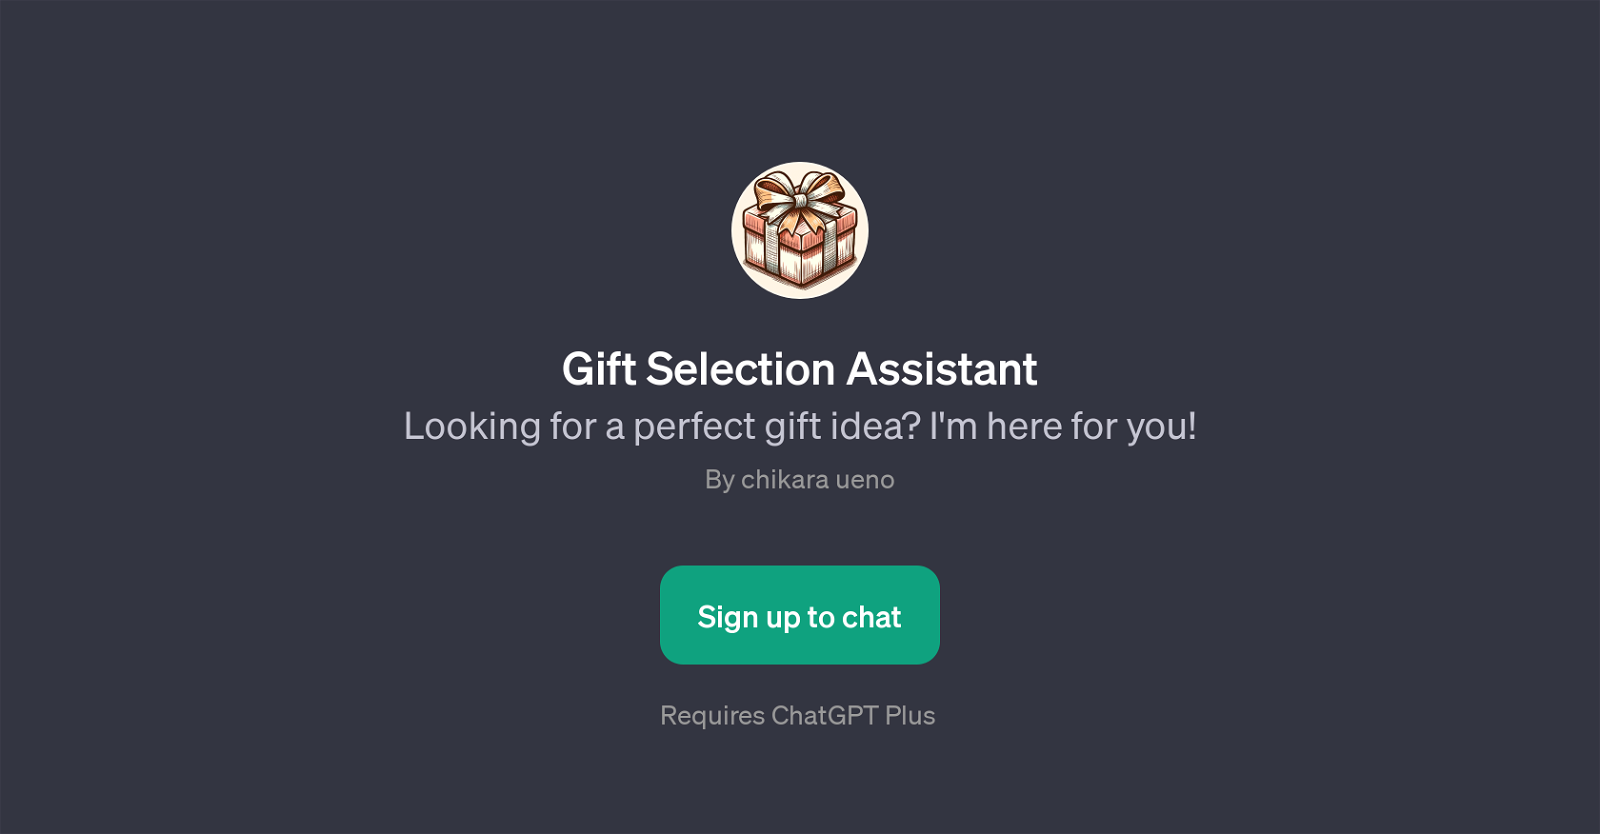 Gift Selection Assistant website